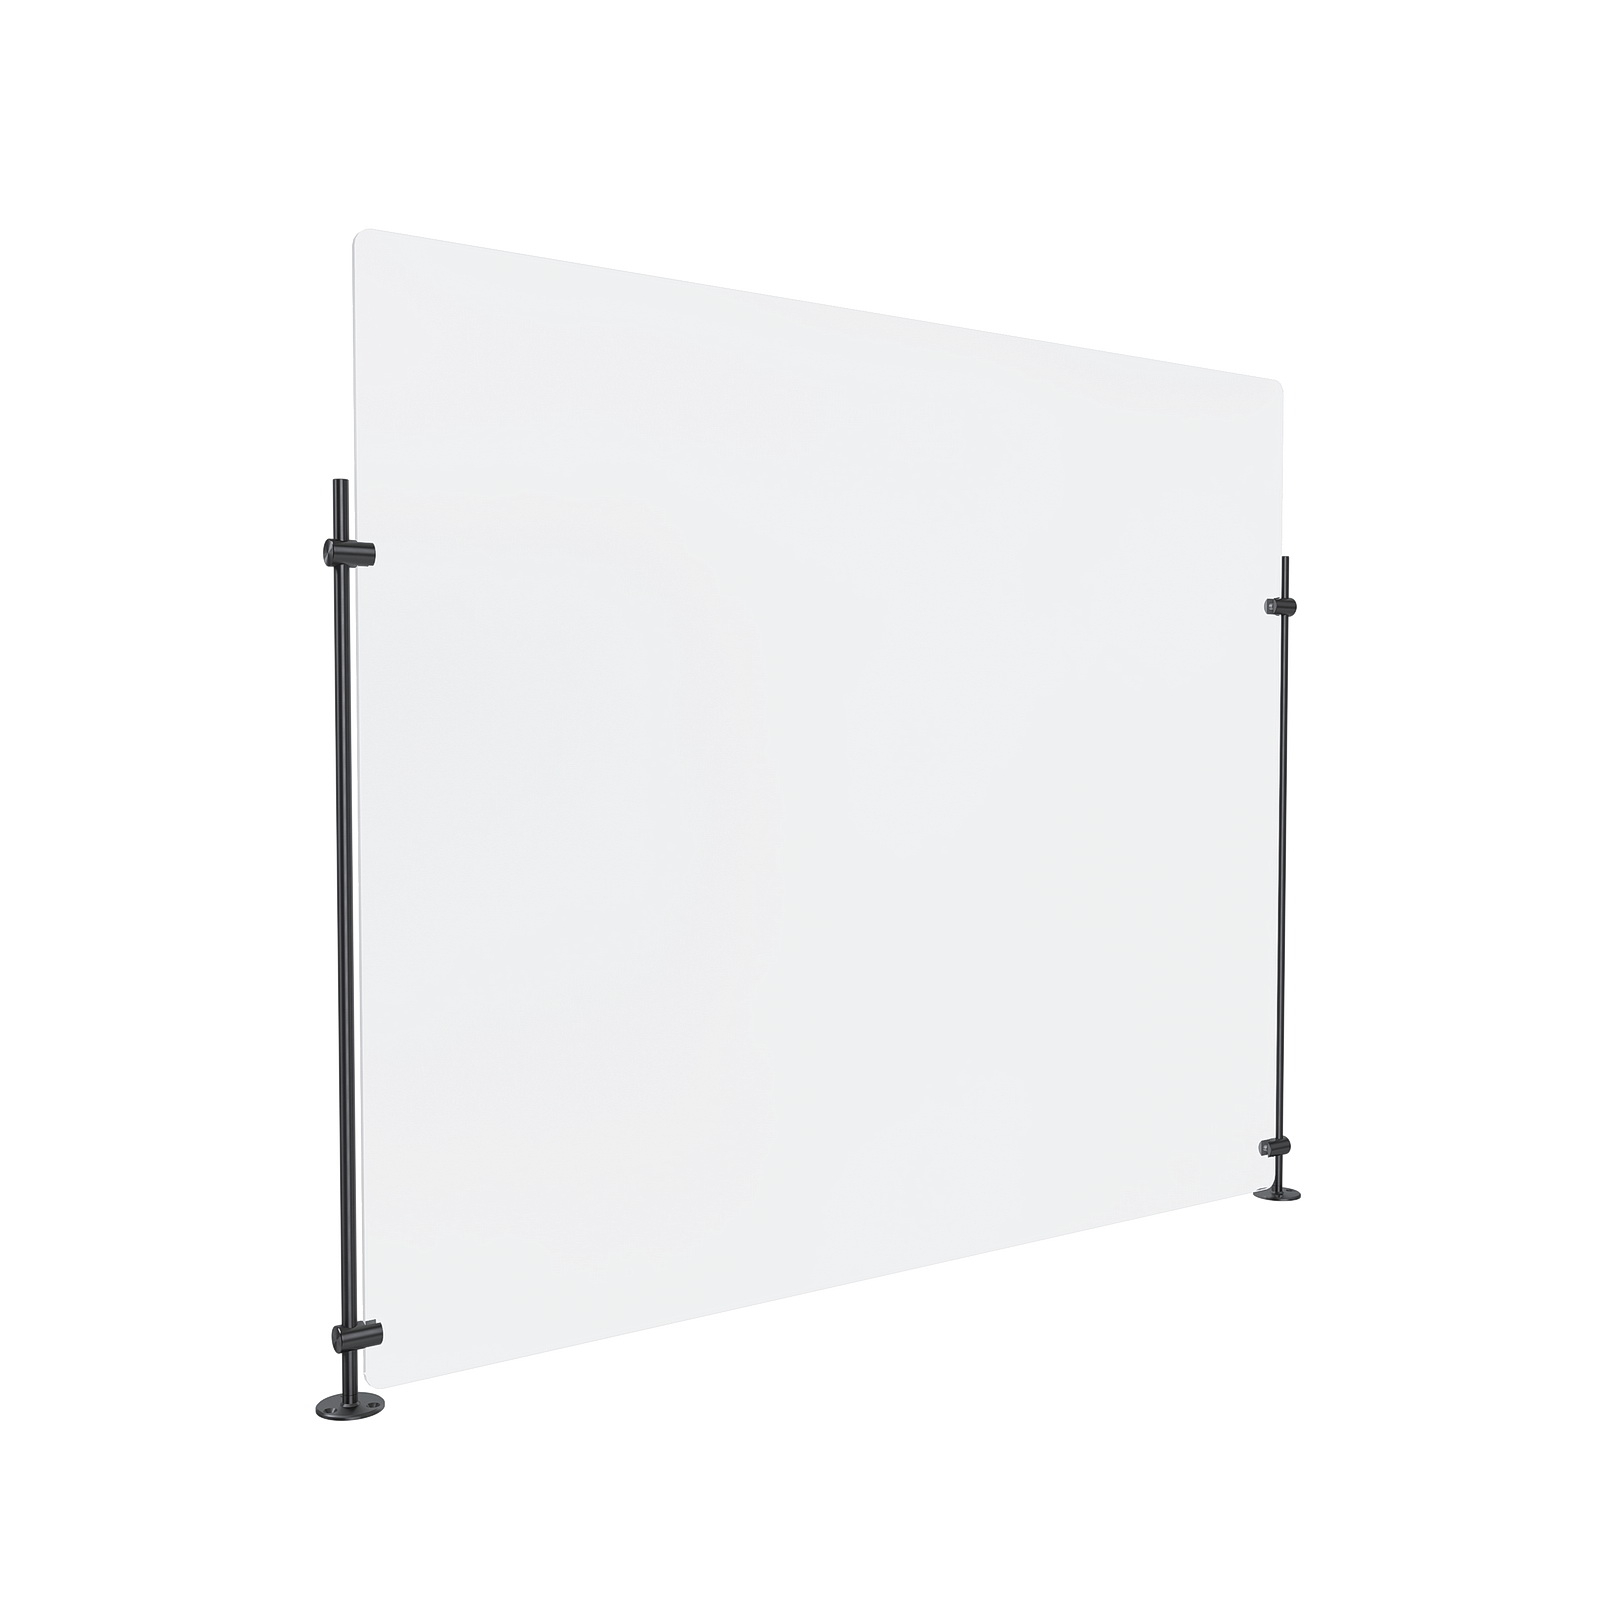 Clear Acrylic Sneeze Guard 36'' Wide x 30'' Tall, with (2) 24'' Tall x 3/8'' Diameter Black Anodized Aluminum Rods on the Side.